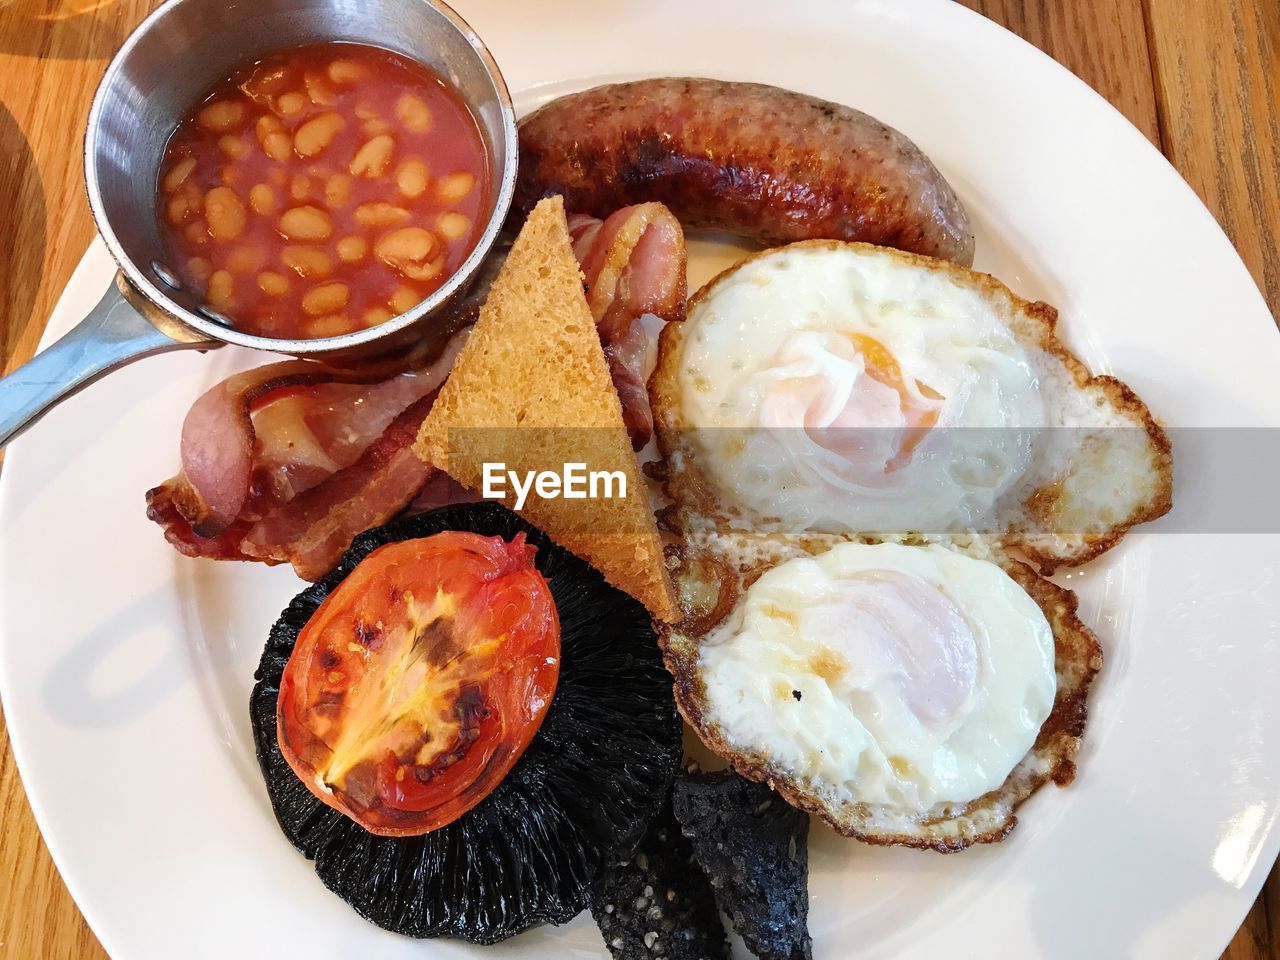 CLOSE-UP OF BREAKFAST SERVED ON TABLE